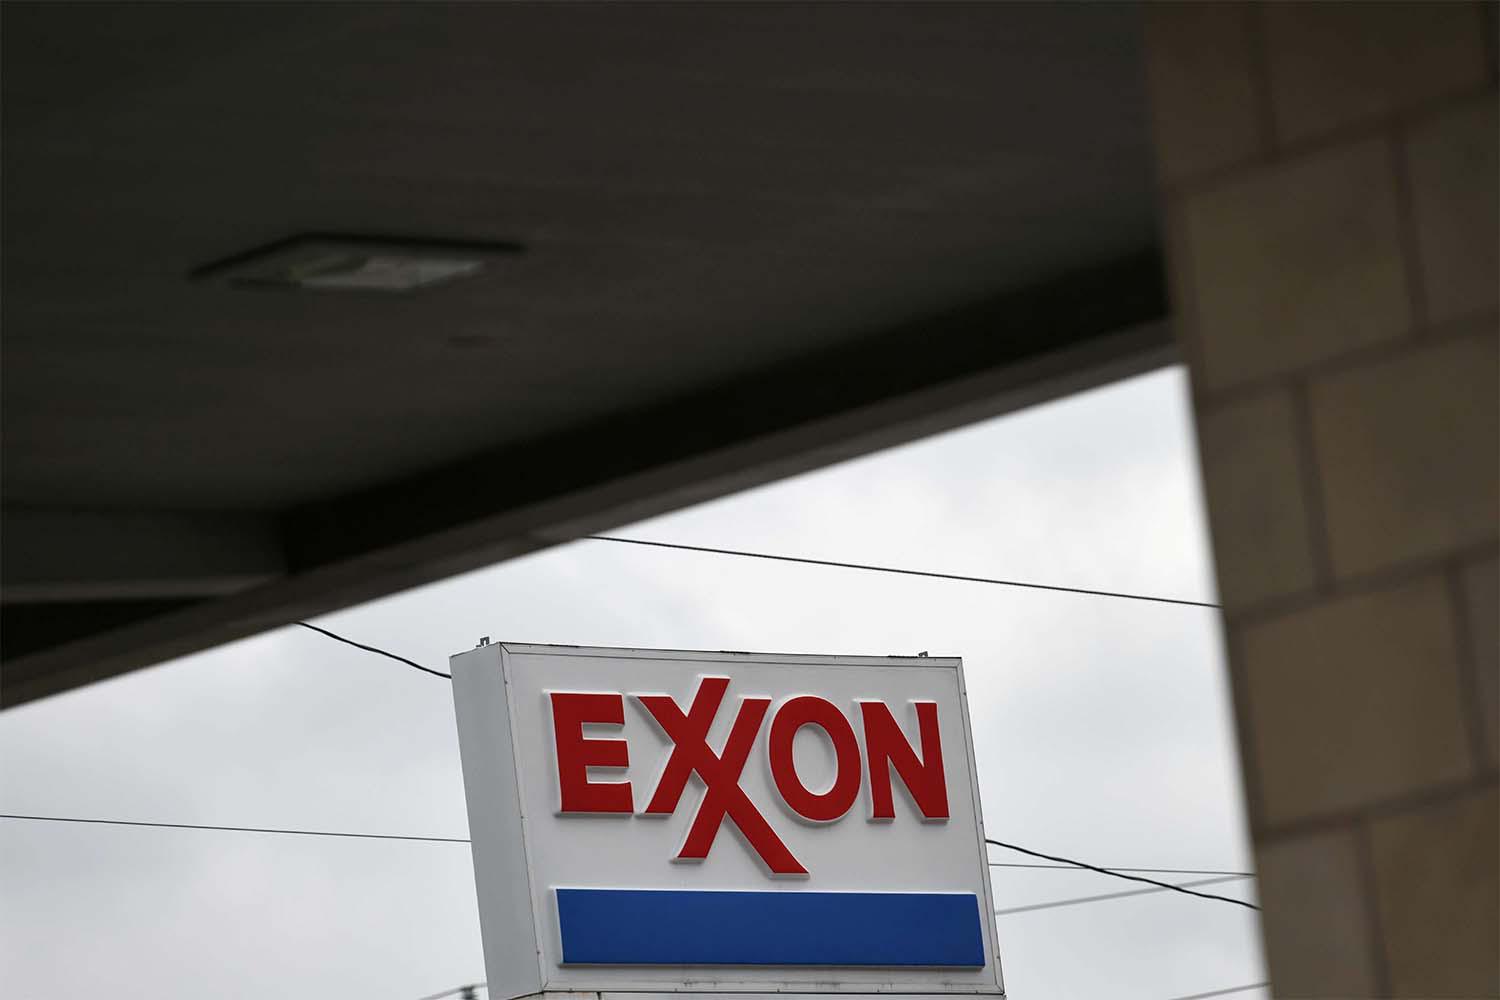 Exxon has been seeking to sell its 32.7% stake in one of Iraq's biggest oilfields, West Qurna 1